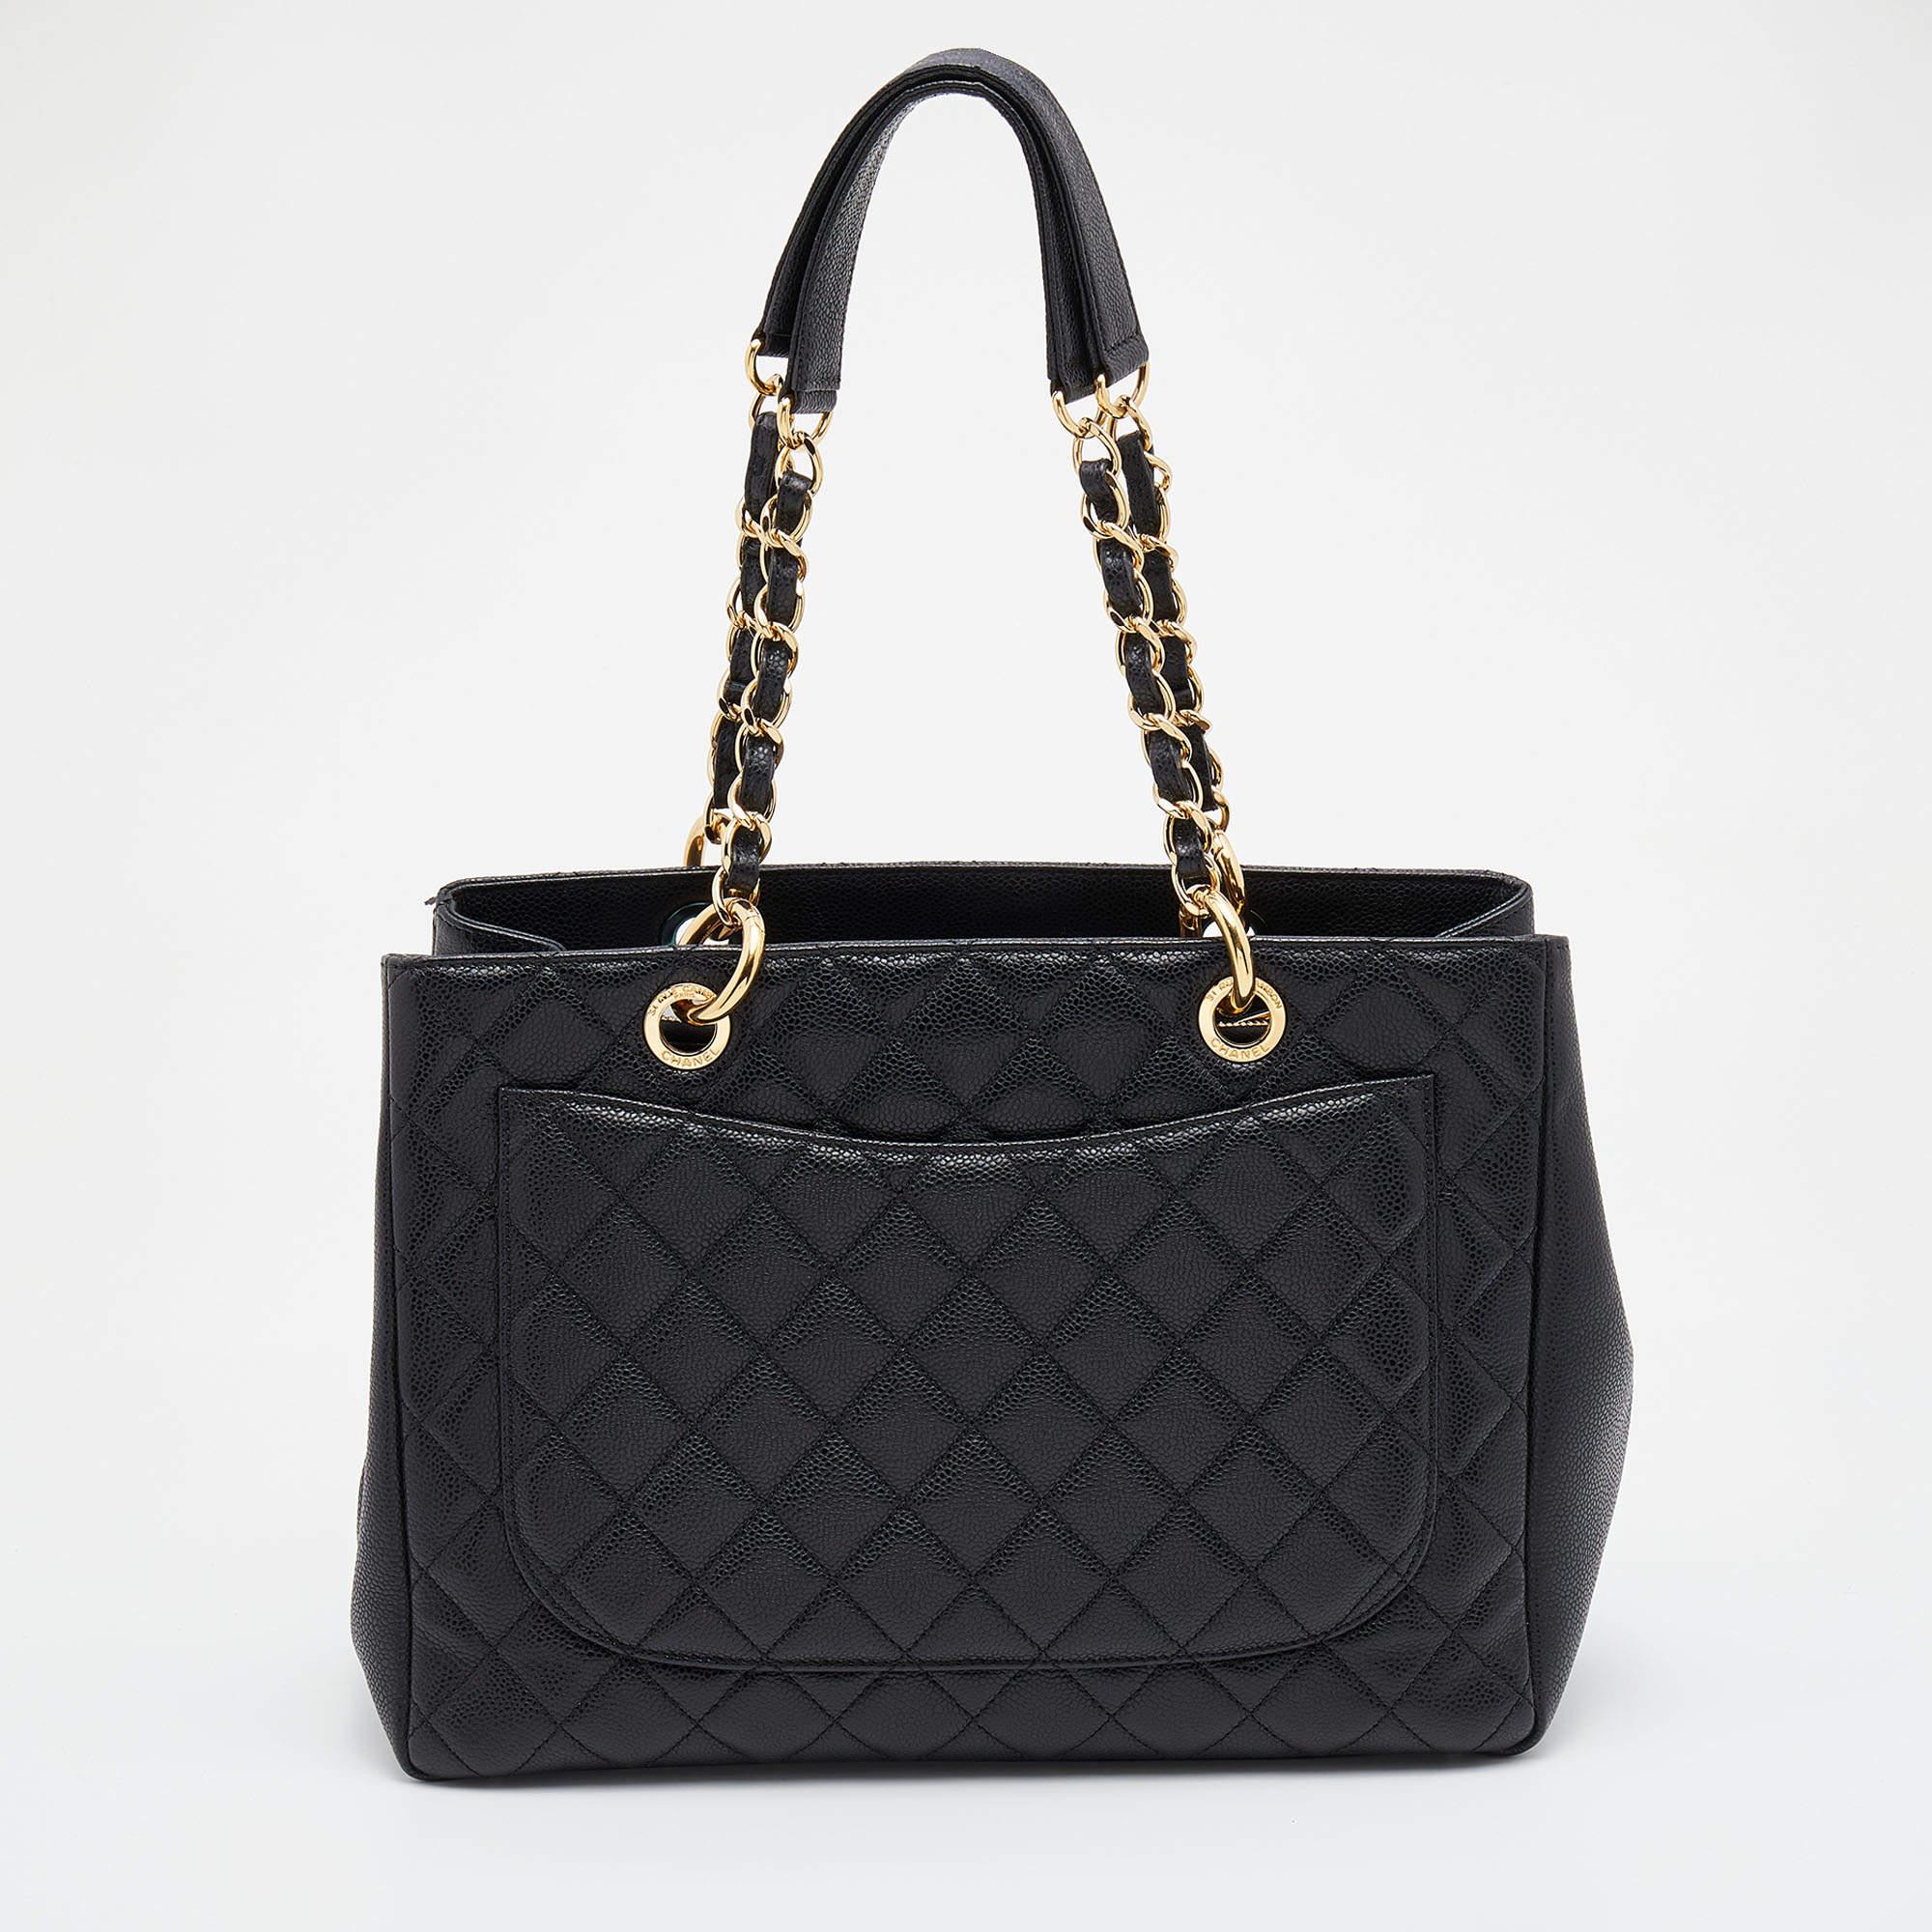 Chanel Black Quilted Caviar Leather GST Shopper Tote 12